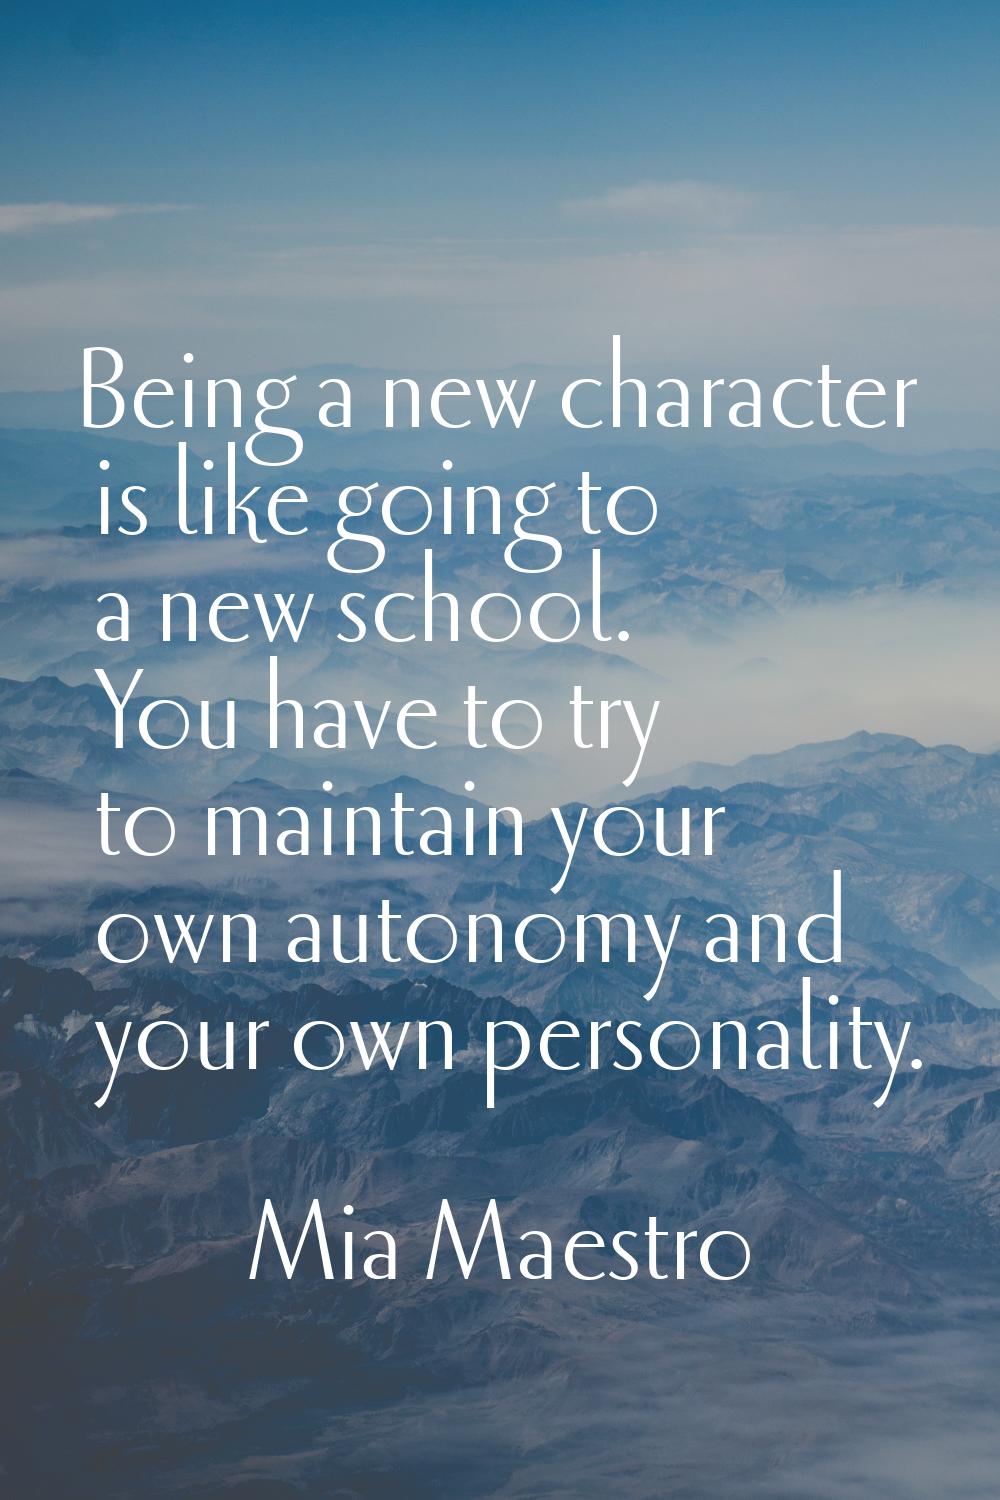 Being a new character is like going to a new school. You have to try to maintain your own autonomy 